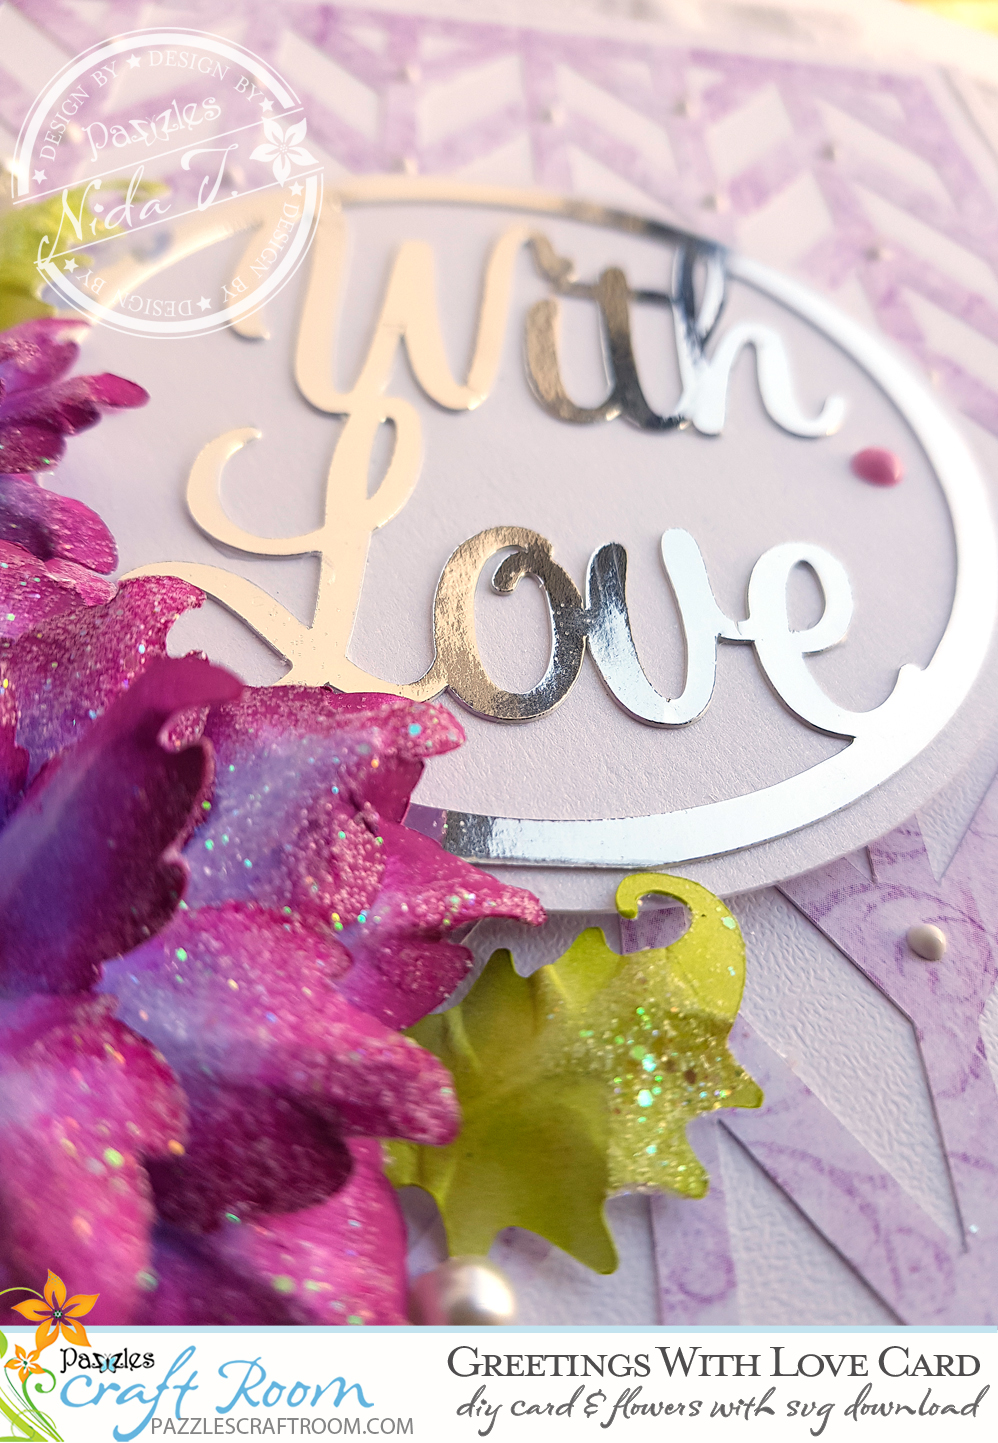 Pazzles DIY Greetings With Love Card with paper flowers. SVG download compatible with all major electronic cutters including Pazzles Inspiration, Cricut, and Silhouette Cameo. Design by Nida Tanweer.